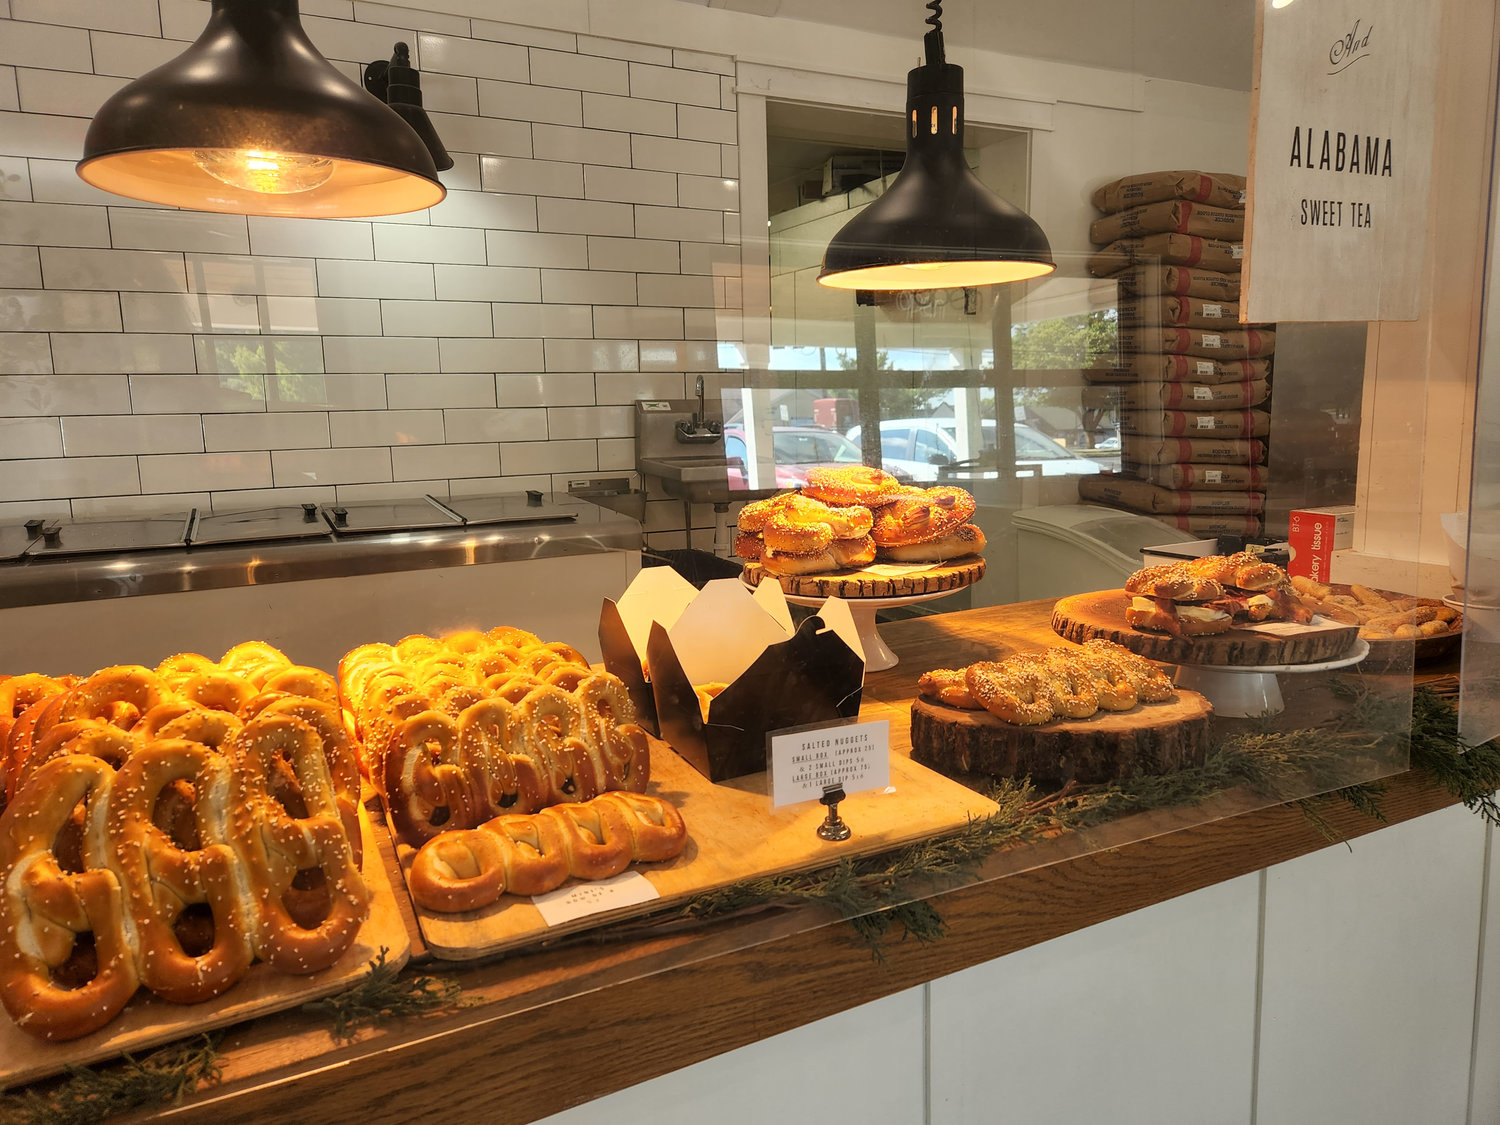 At The Salt Box in Plumsteadville, there is always a variety of pretzels and sandwiches to choose from